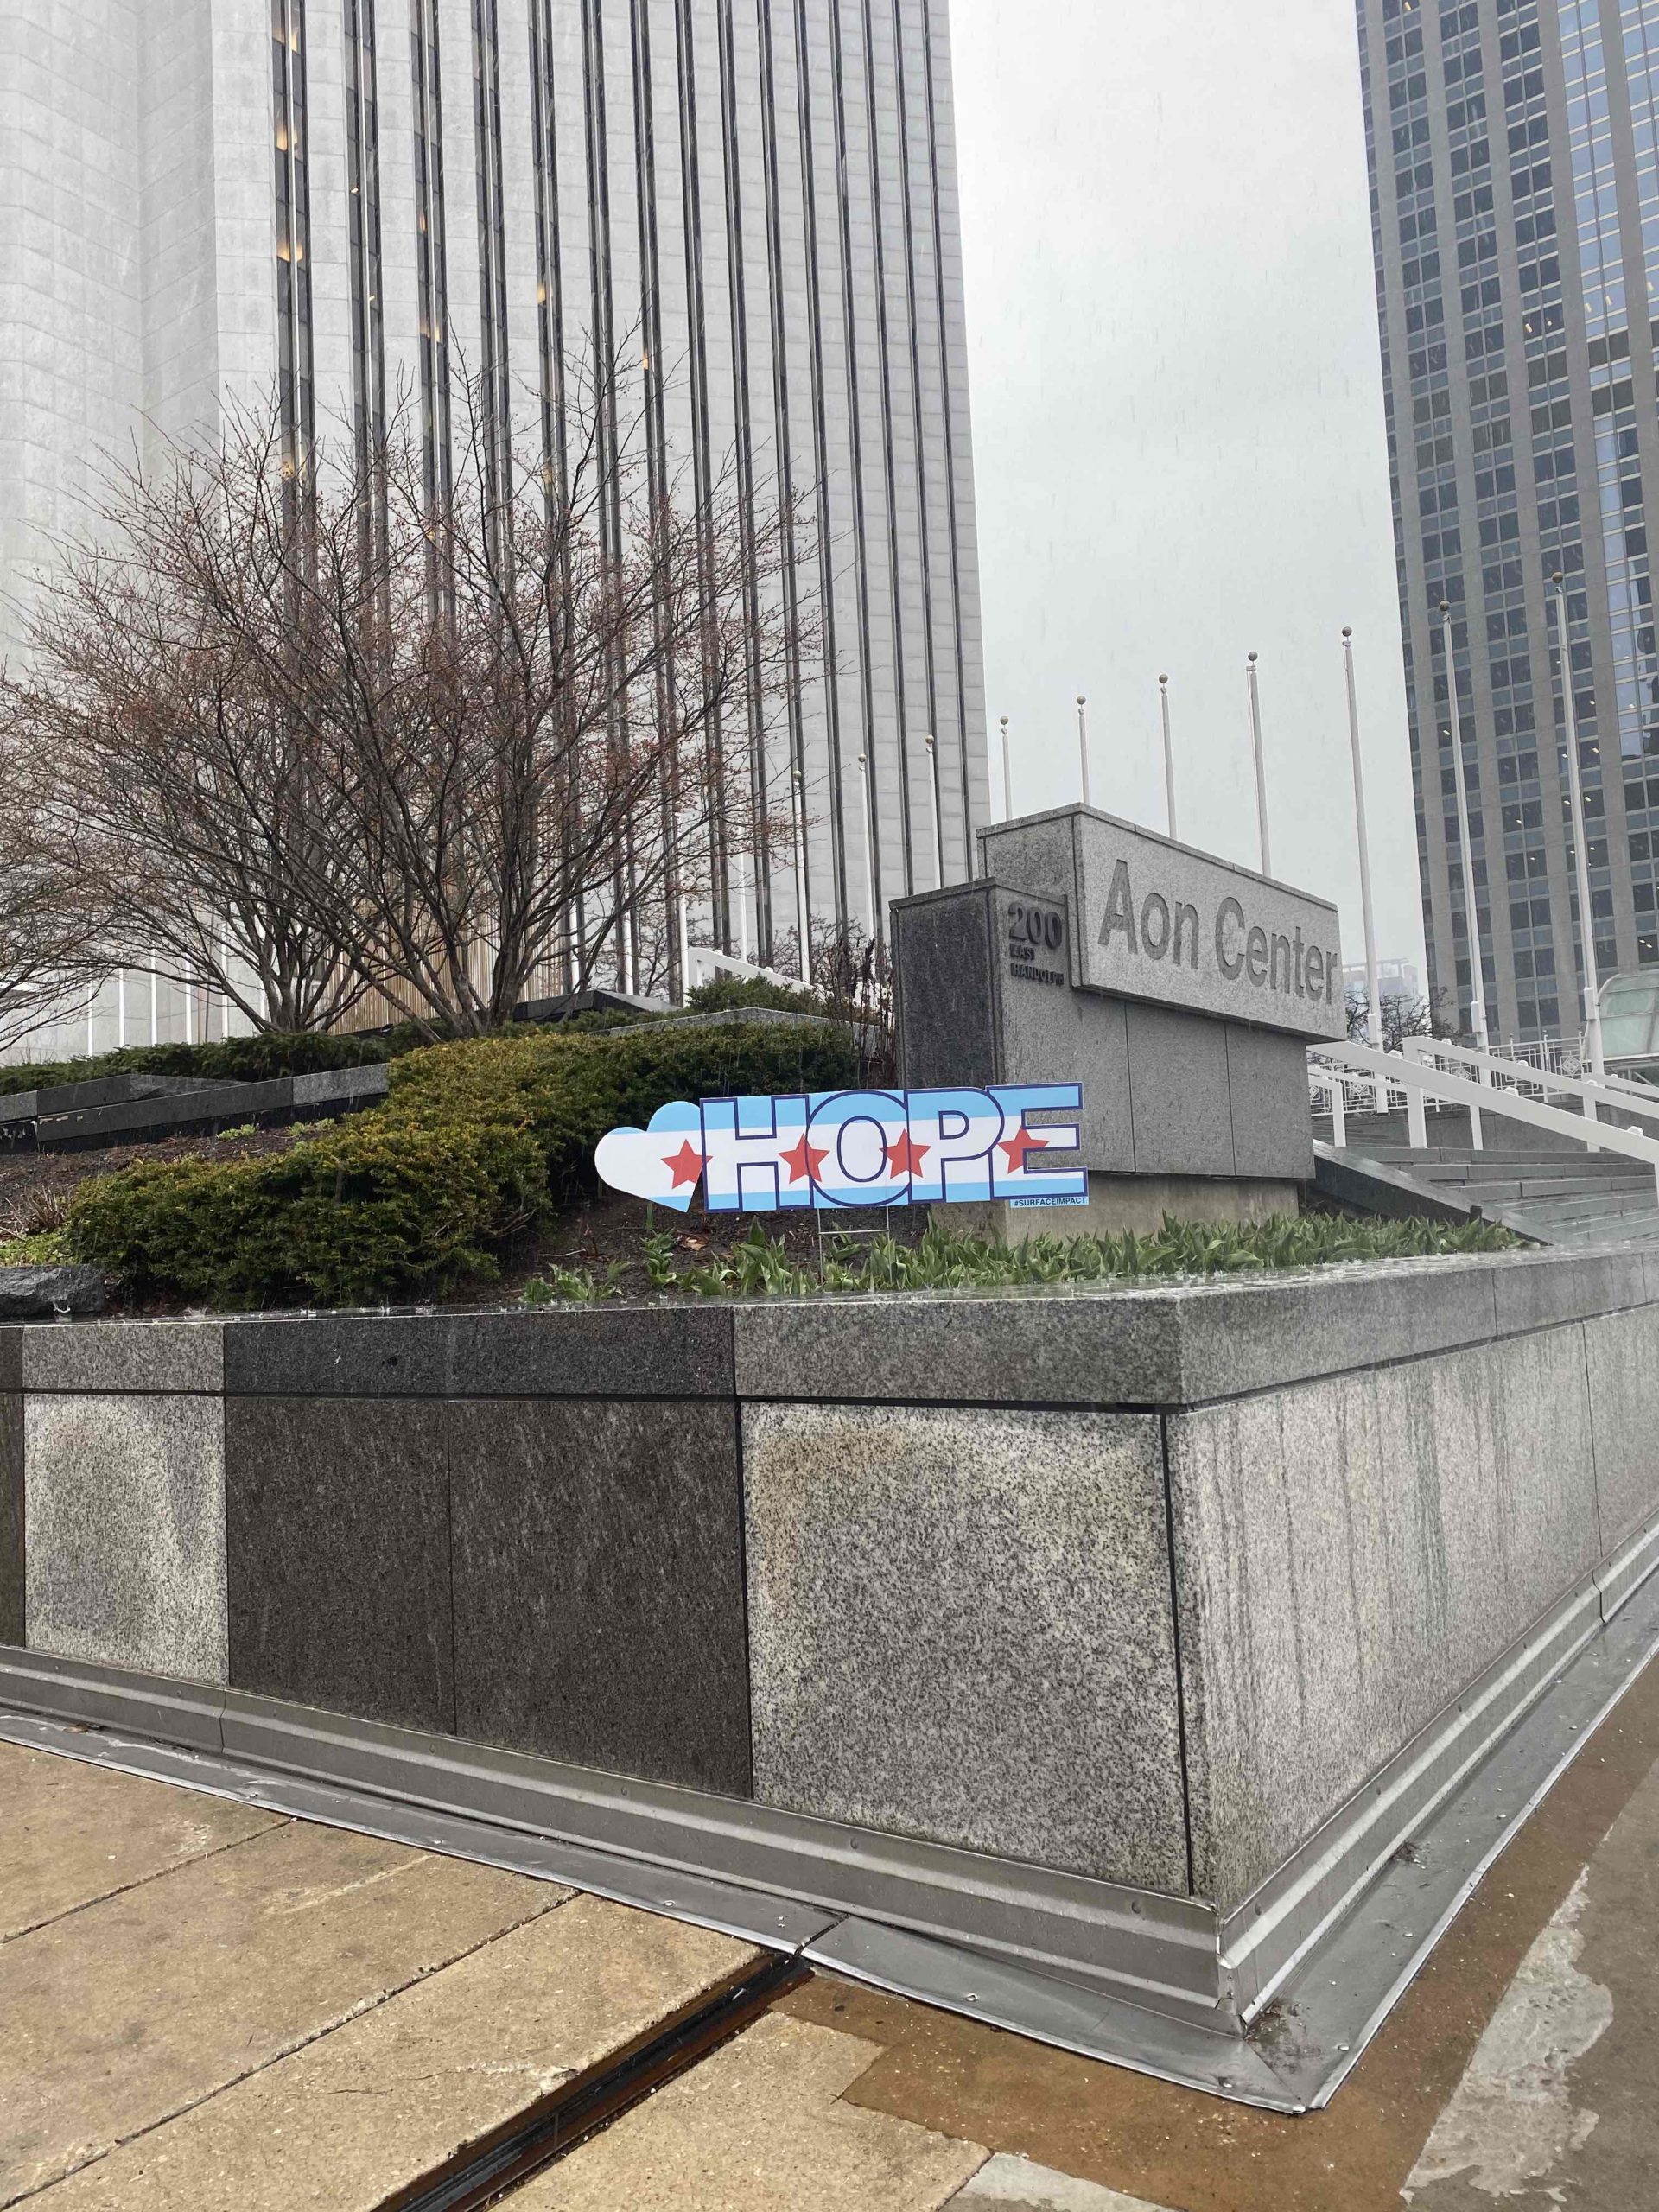 hope sign in front of the aon center building